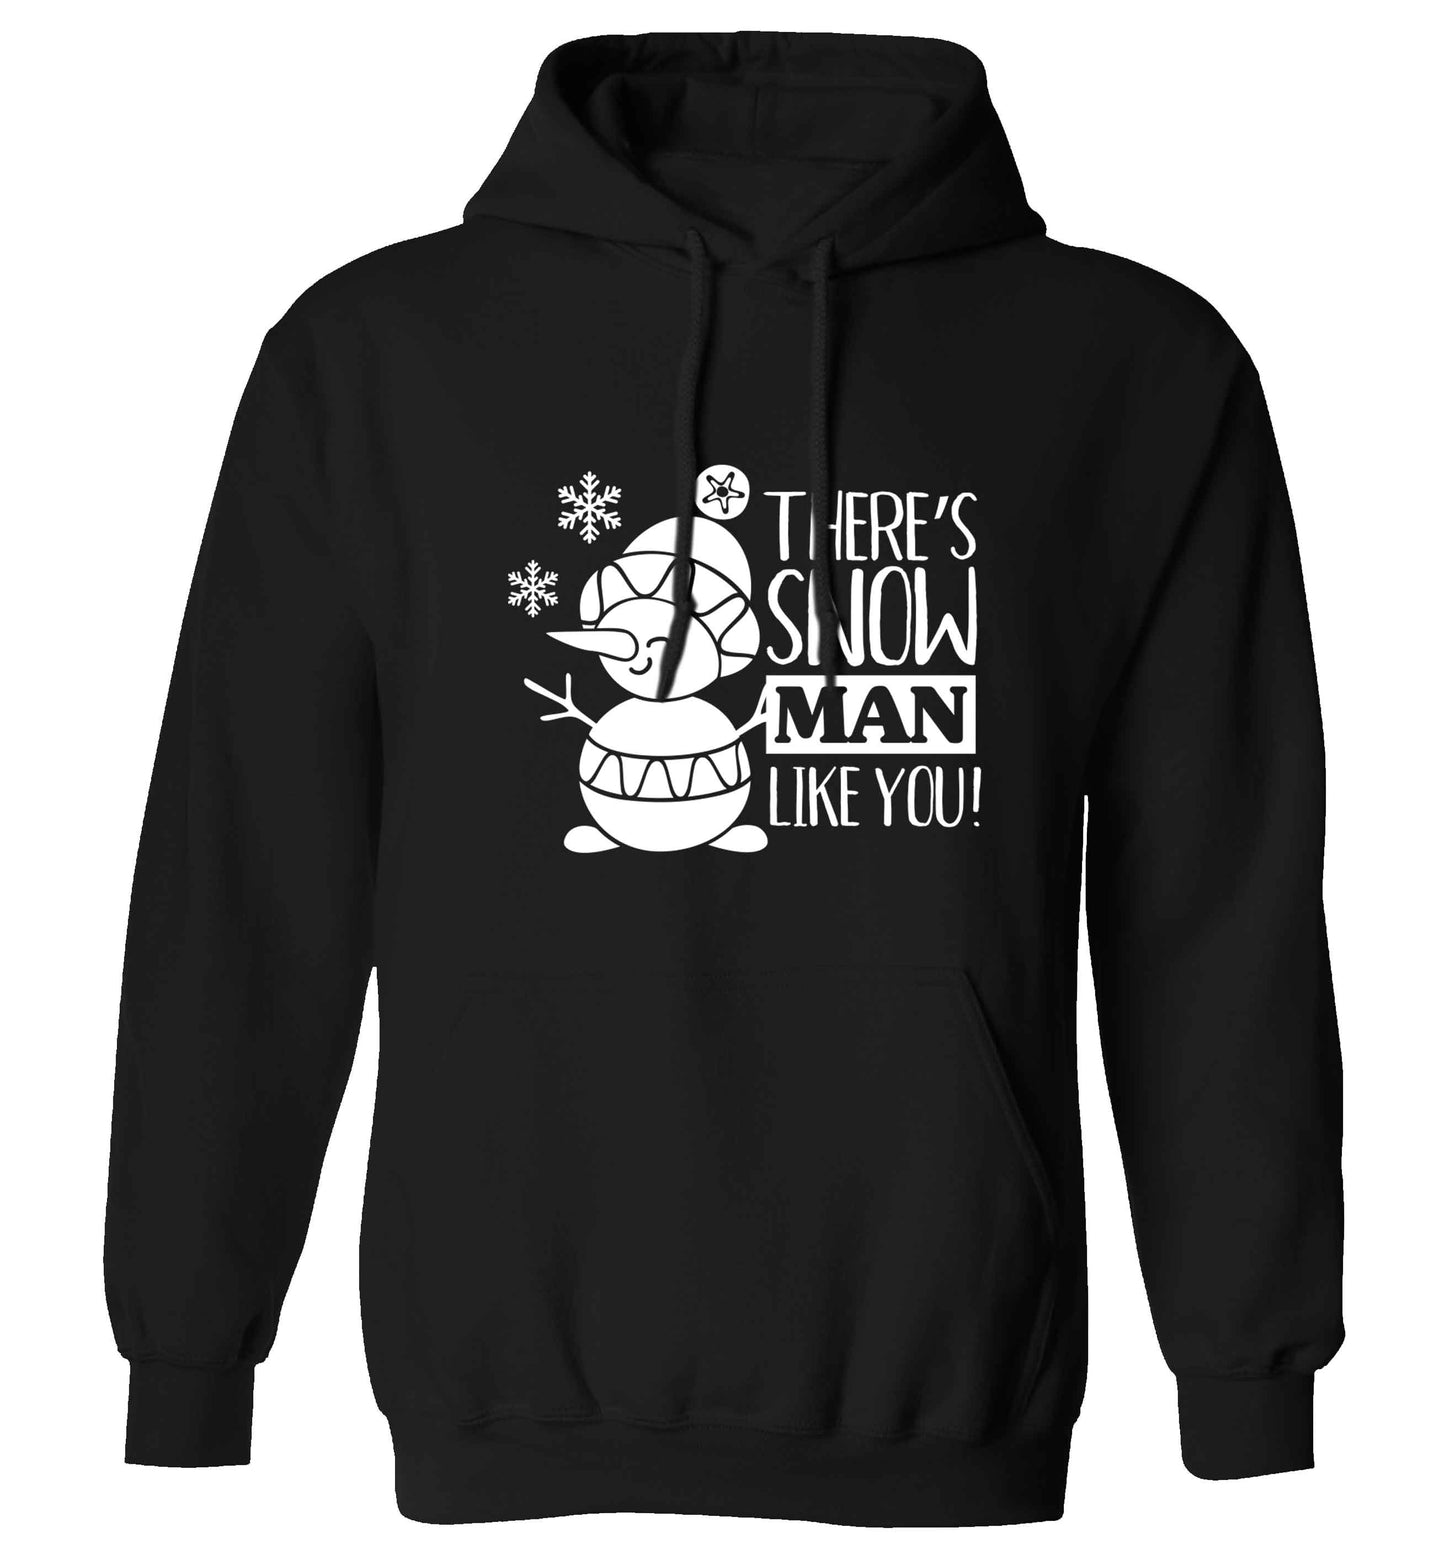 There's snow man like you adults unisex black hoodie 2XL